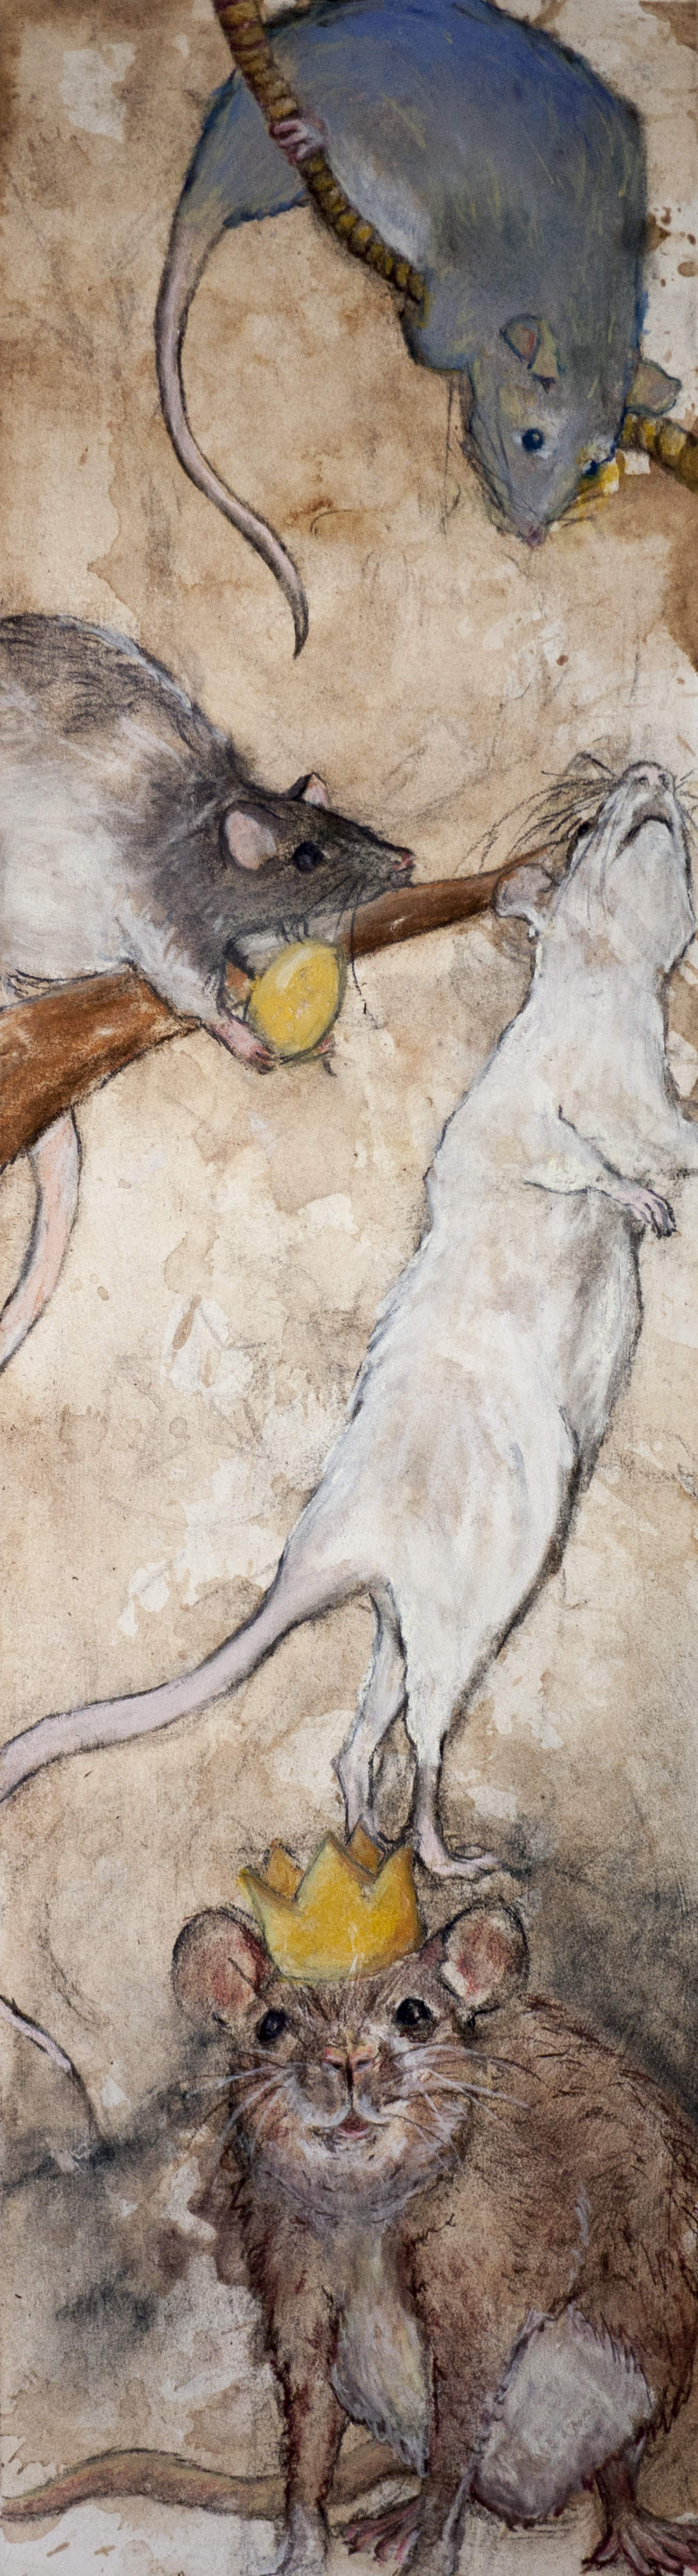 Four rats of various breeds arranged on a long format picture. The middle rat is holding a golden egg, and the lowest rat is wearing a god crown.